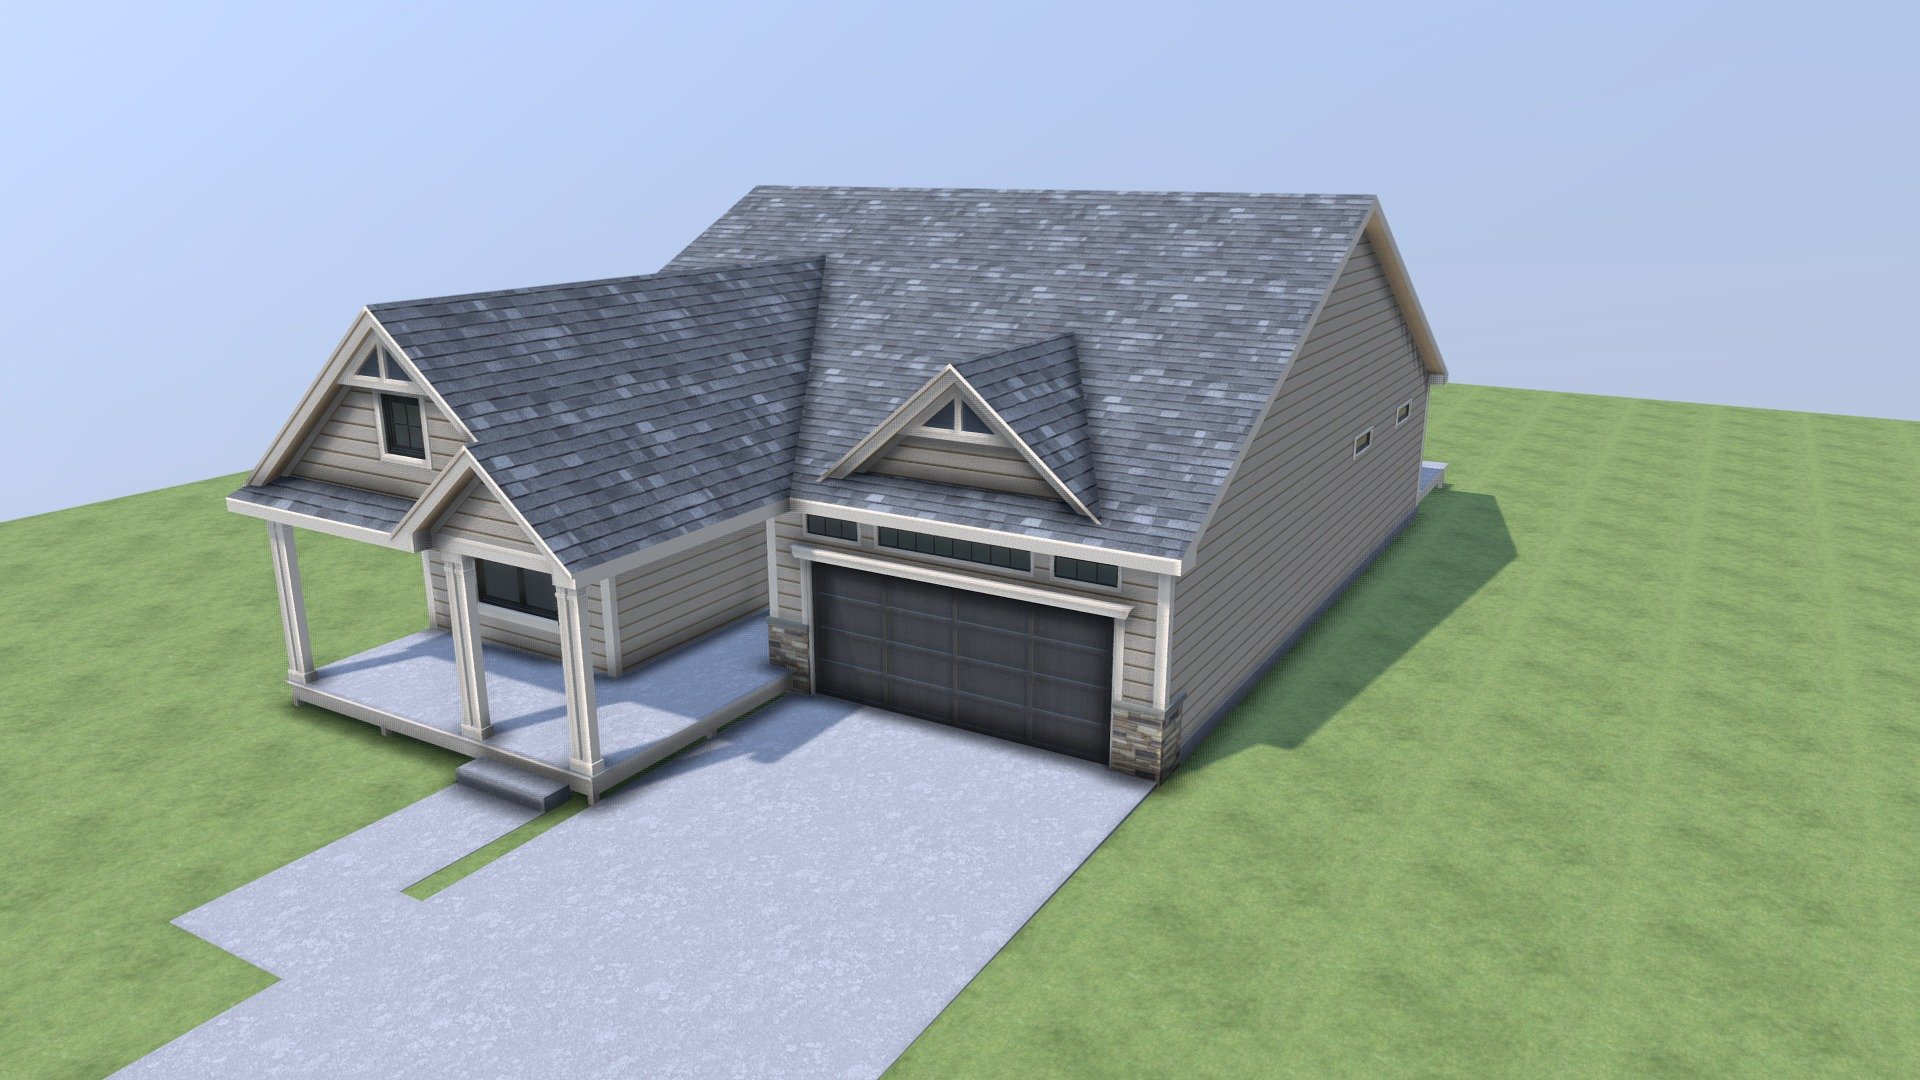 We prepared this 3D exterior of a small single family home, covering all required details of structure and colors 3d model